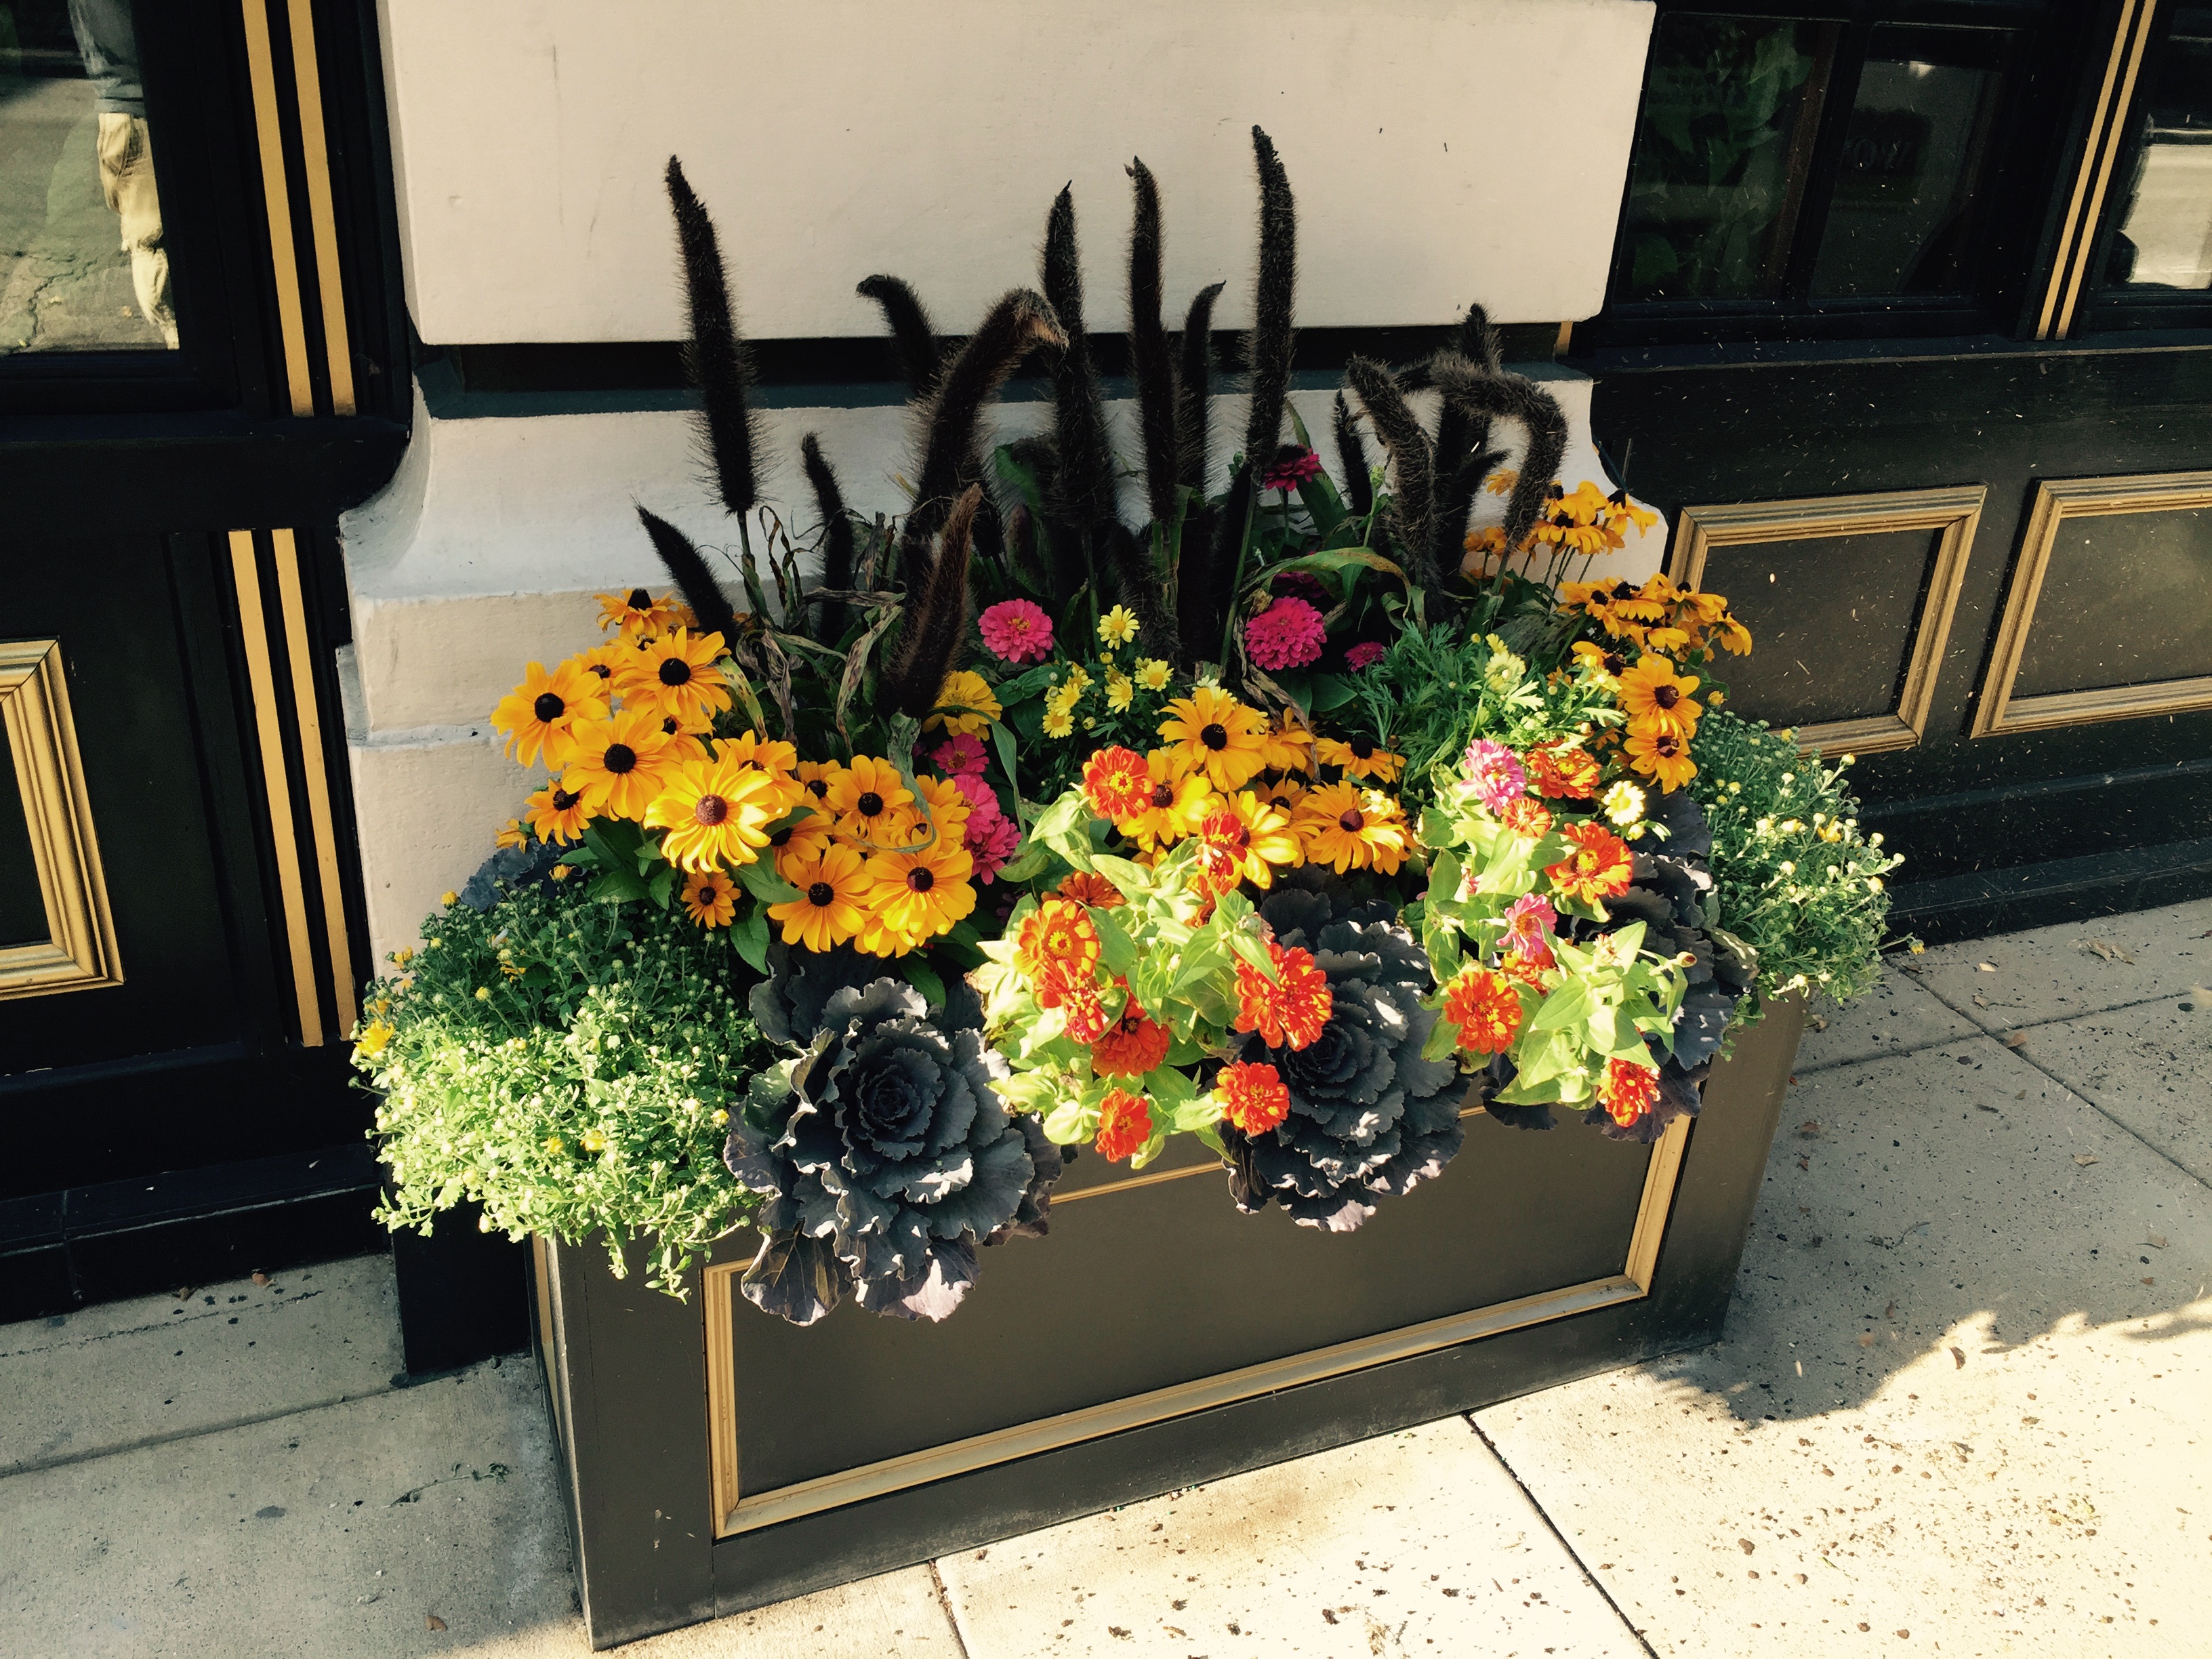 Fall is a beautiful time of the year and WOW Windowboxes adds color galore!